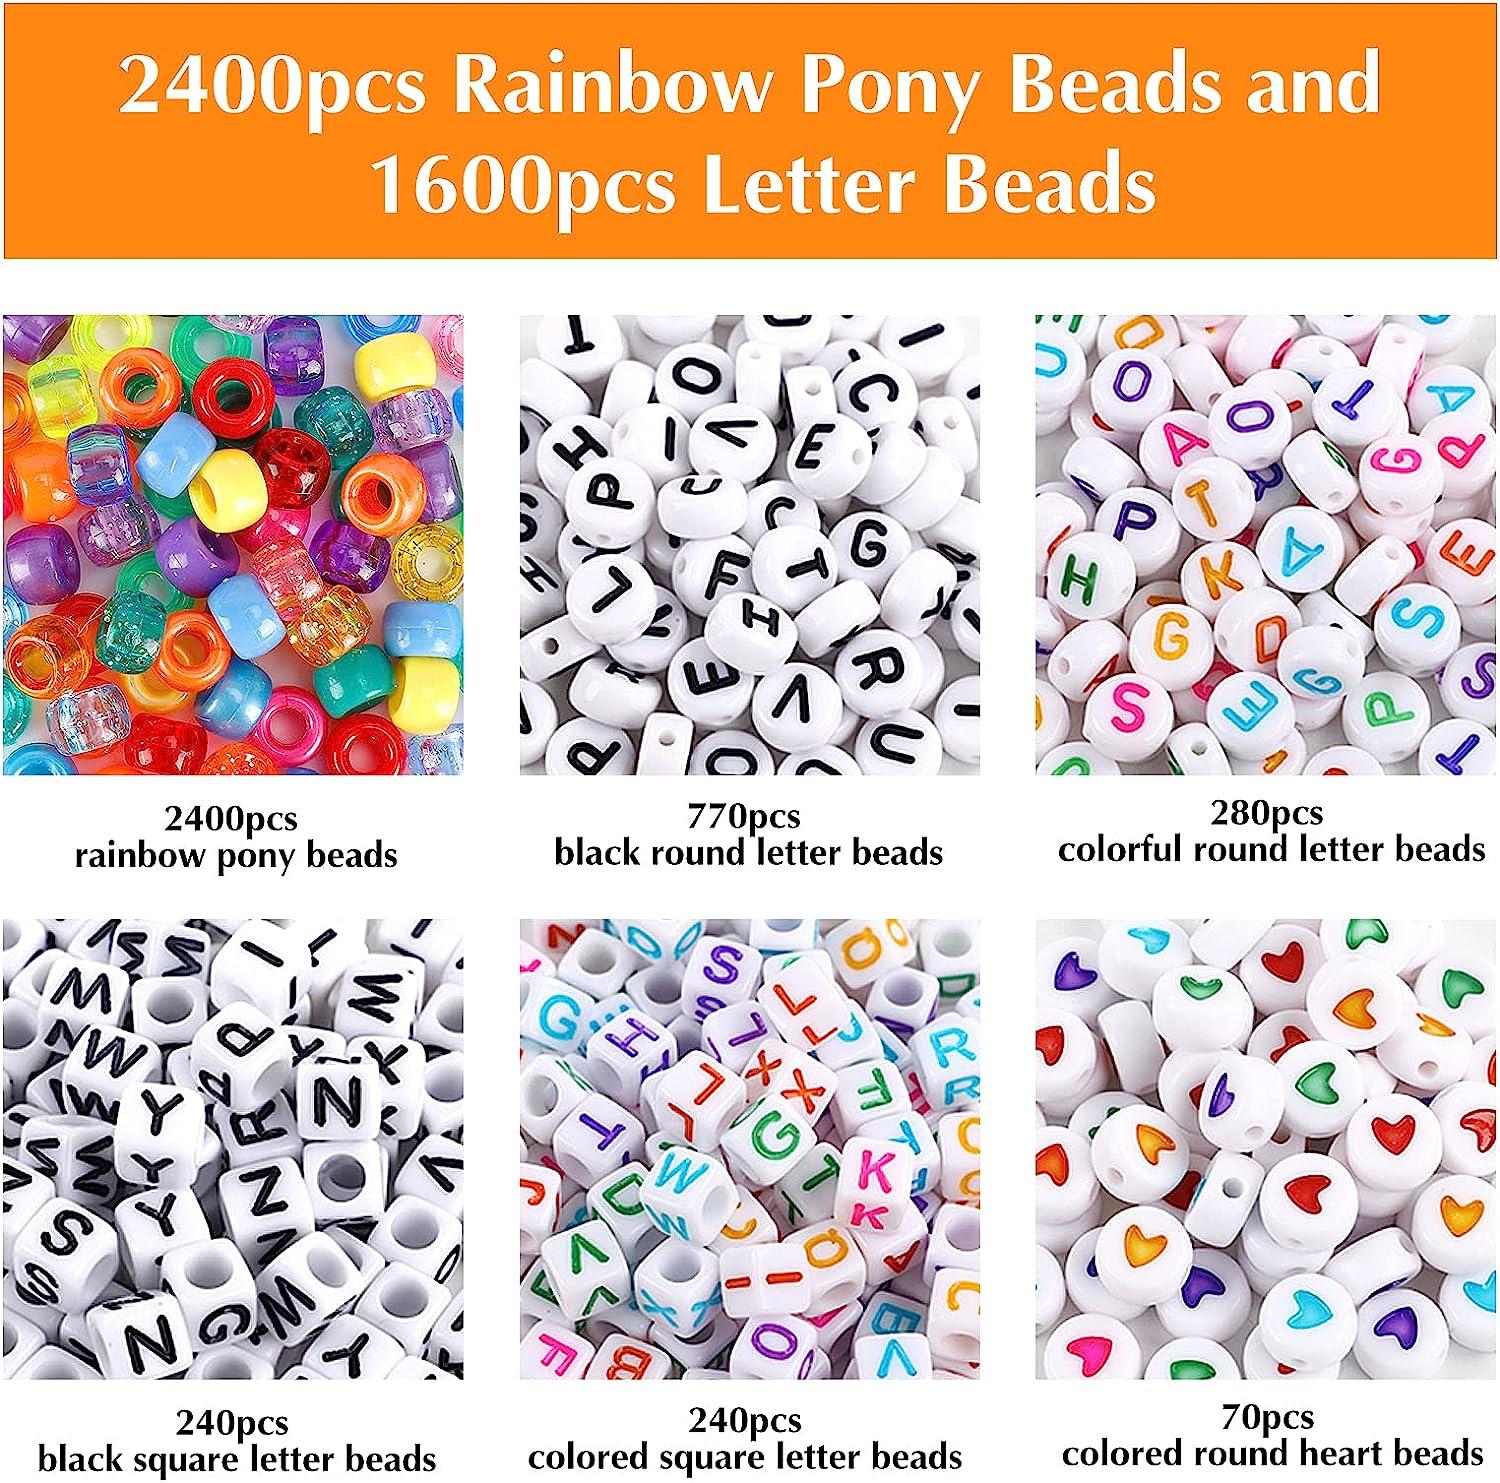 UOONY 4000pcs Pony Beads Kit, 2400pcs Rainbow Kandi Beads and 1600pcs Letter  Beads, 24 Colors Plastic Craft Beads Bulk for Bracelets Jewelry Making with  20m Crystal String and 30m Elastic String